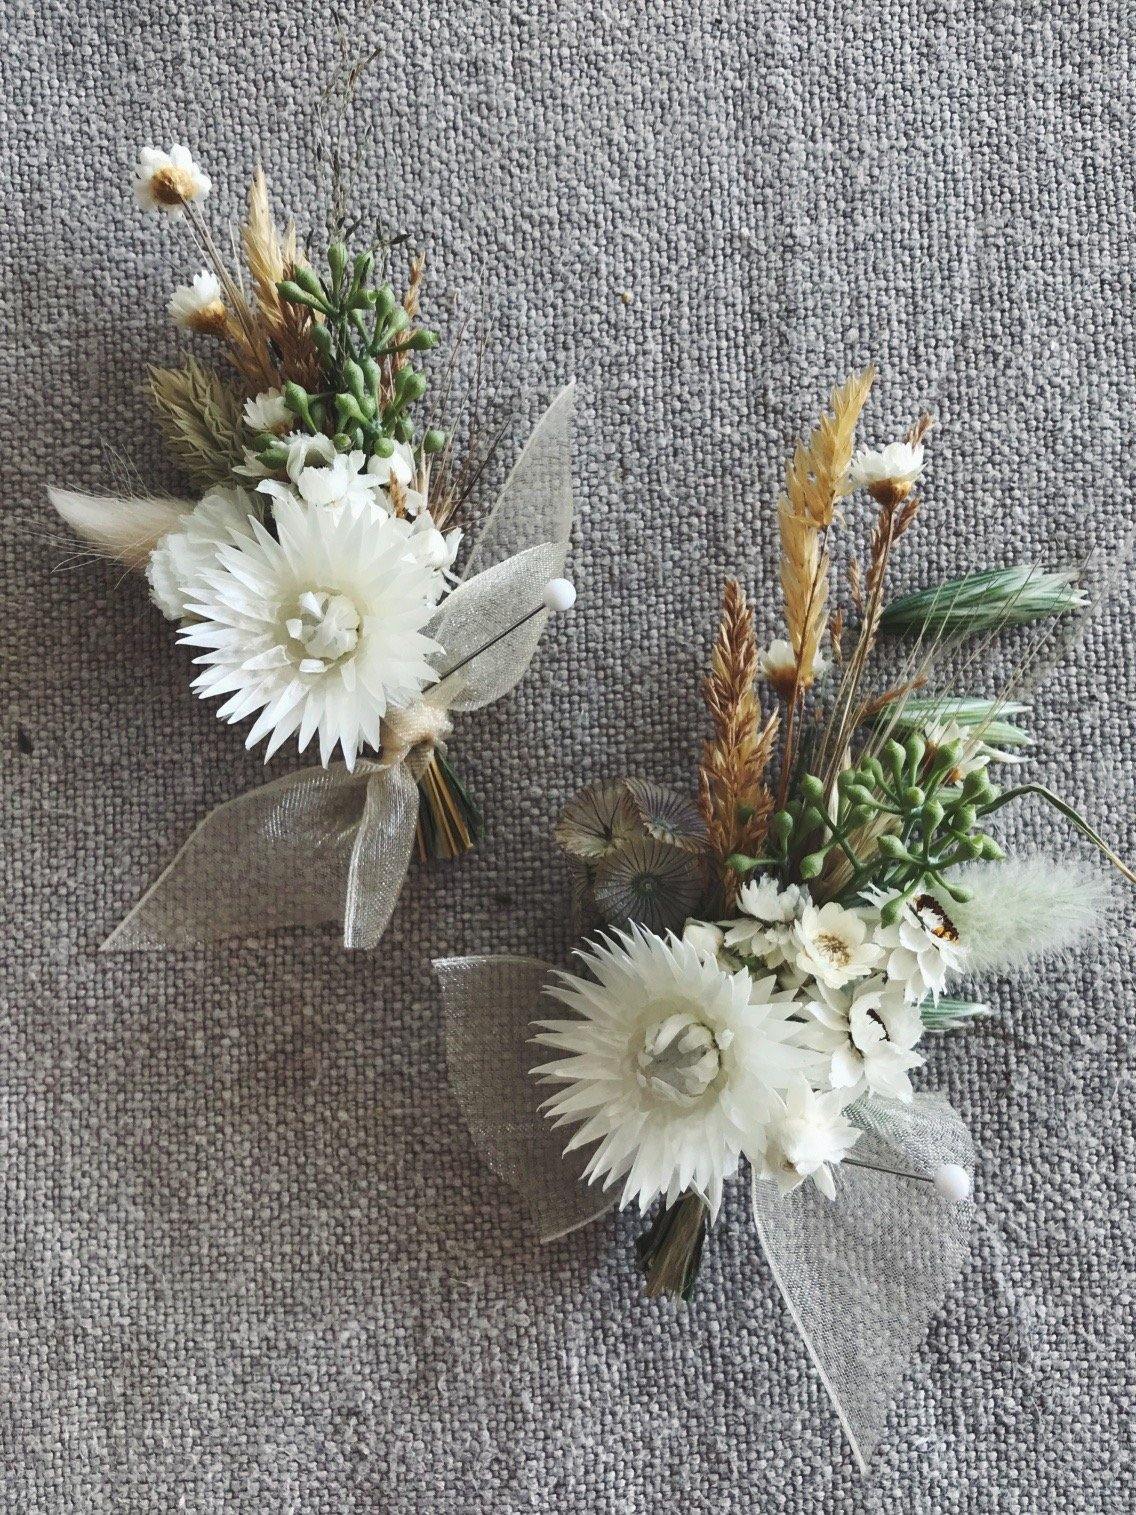 Weddings - Pin-On Wearable Flowers - The Wild Bunch Weddings - The Wild Bunch Florist - Vancouver Flower Shop Delivery